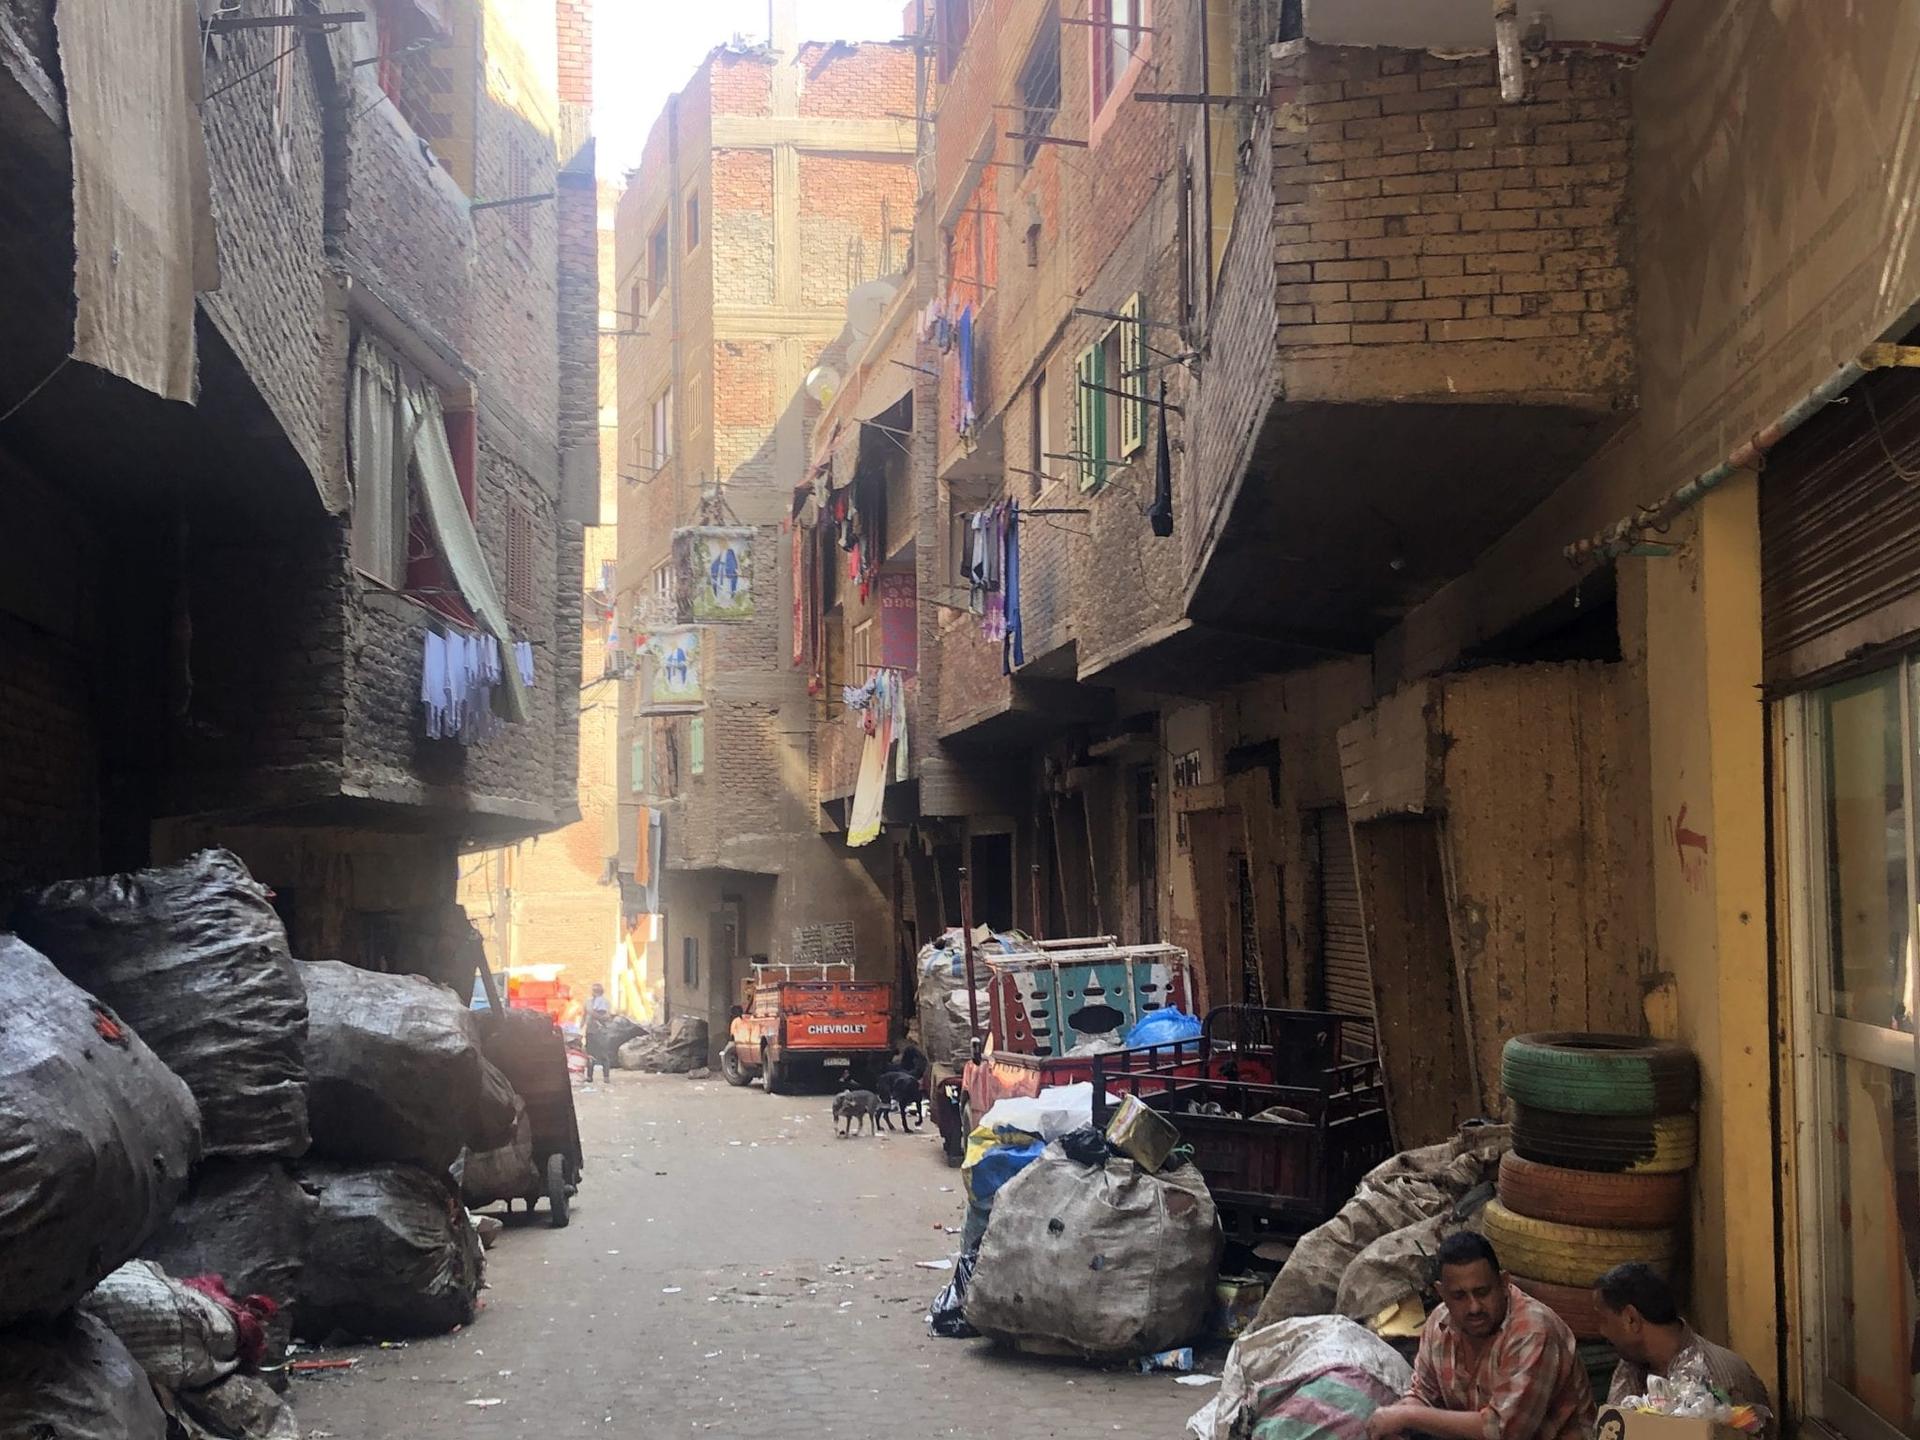 Cairo’s marginalized Christians make ‘Garbage City’ a blessed place